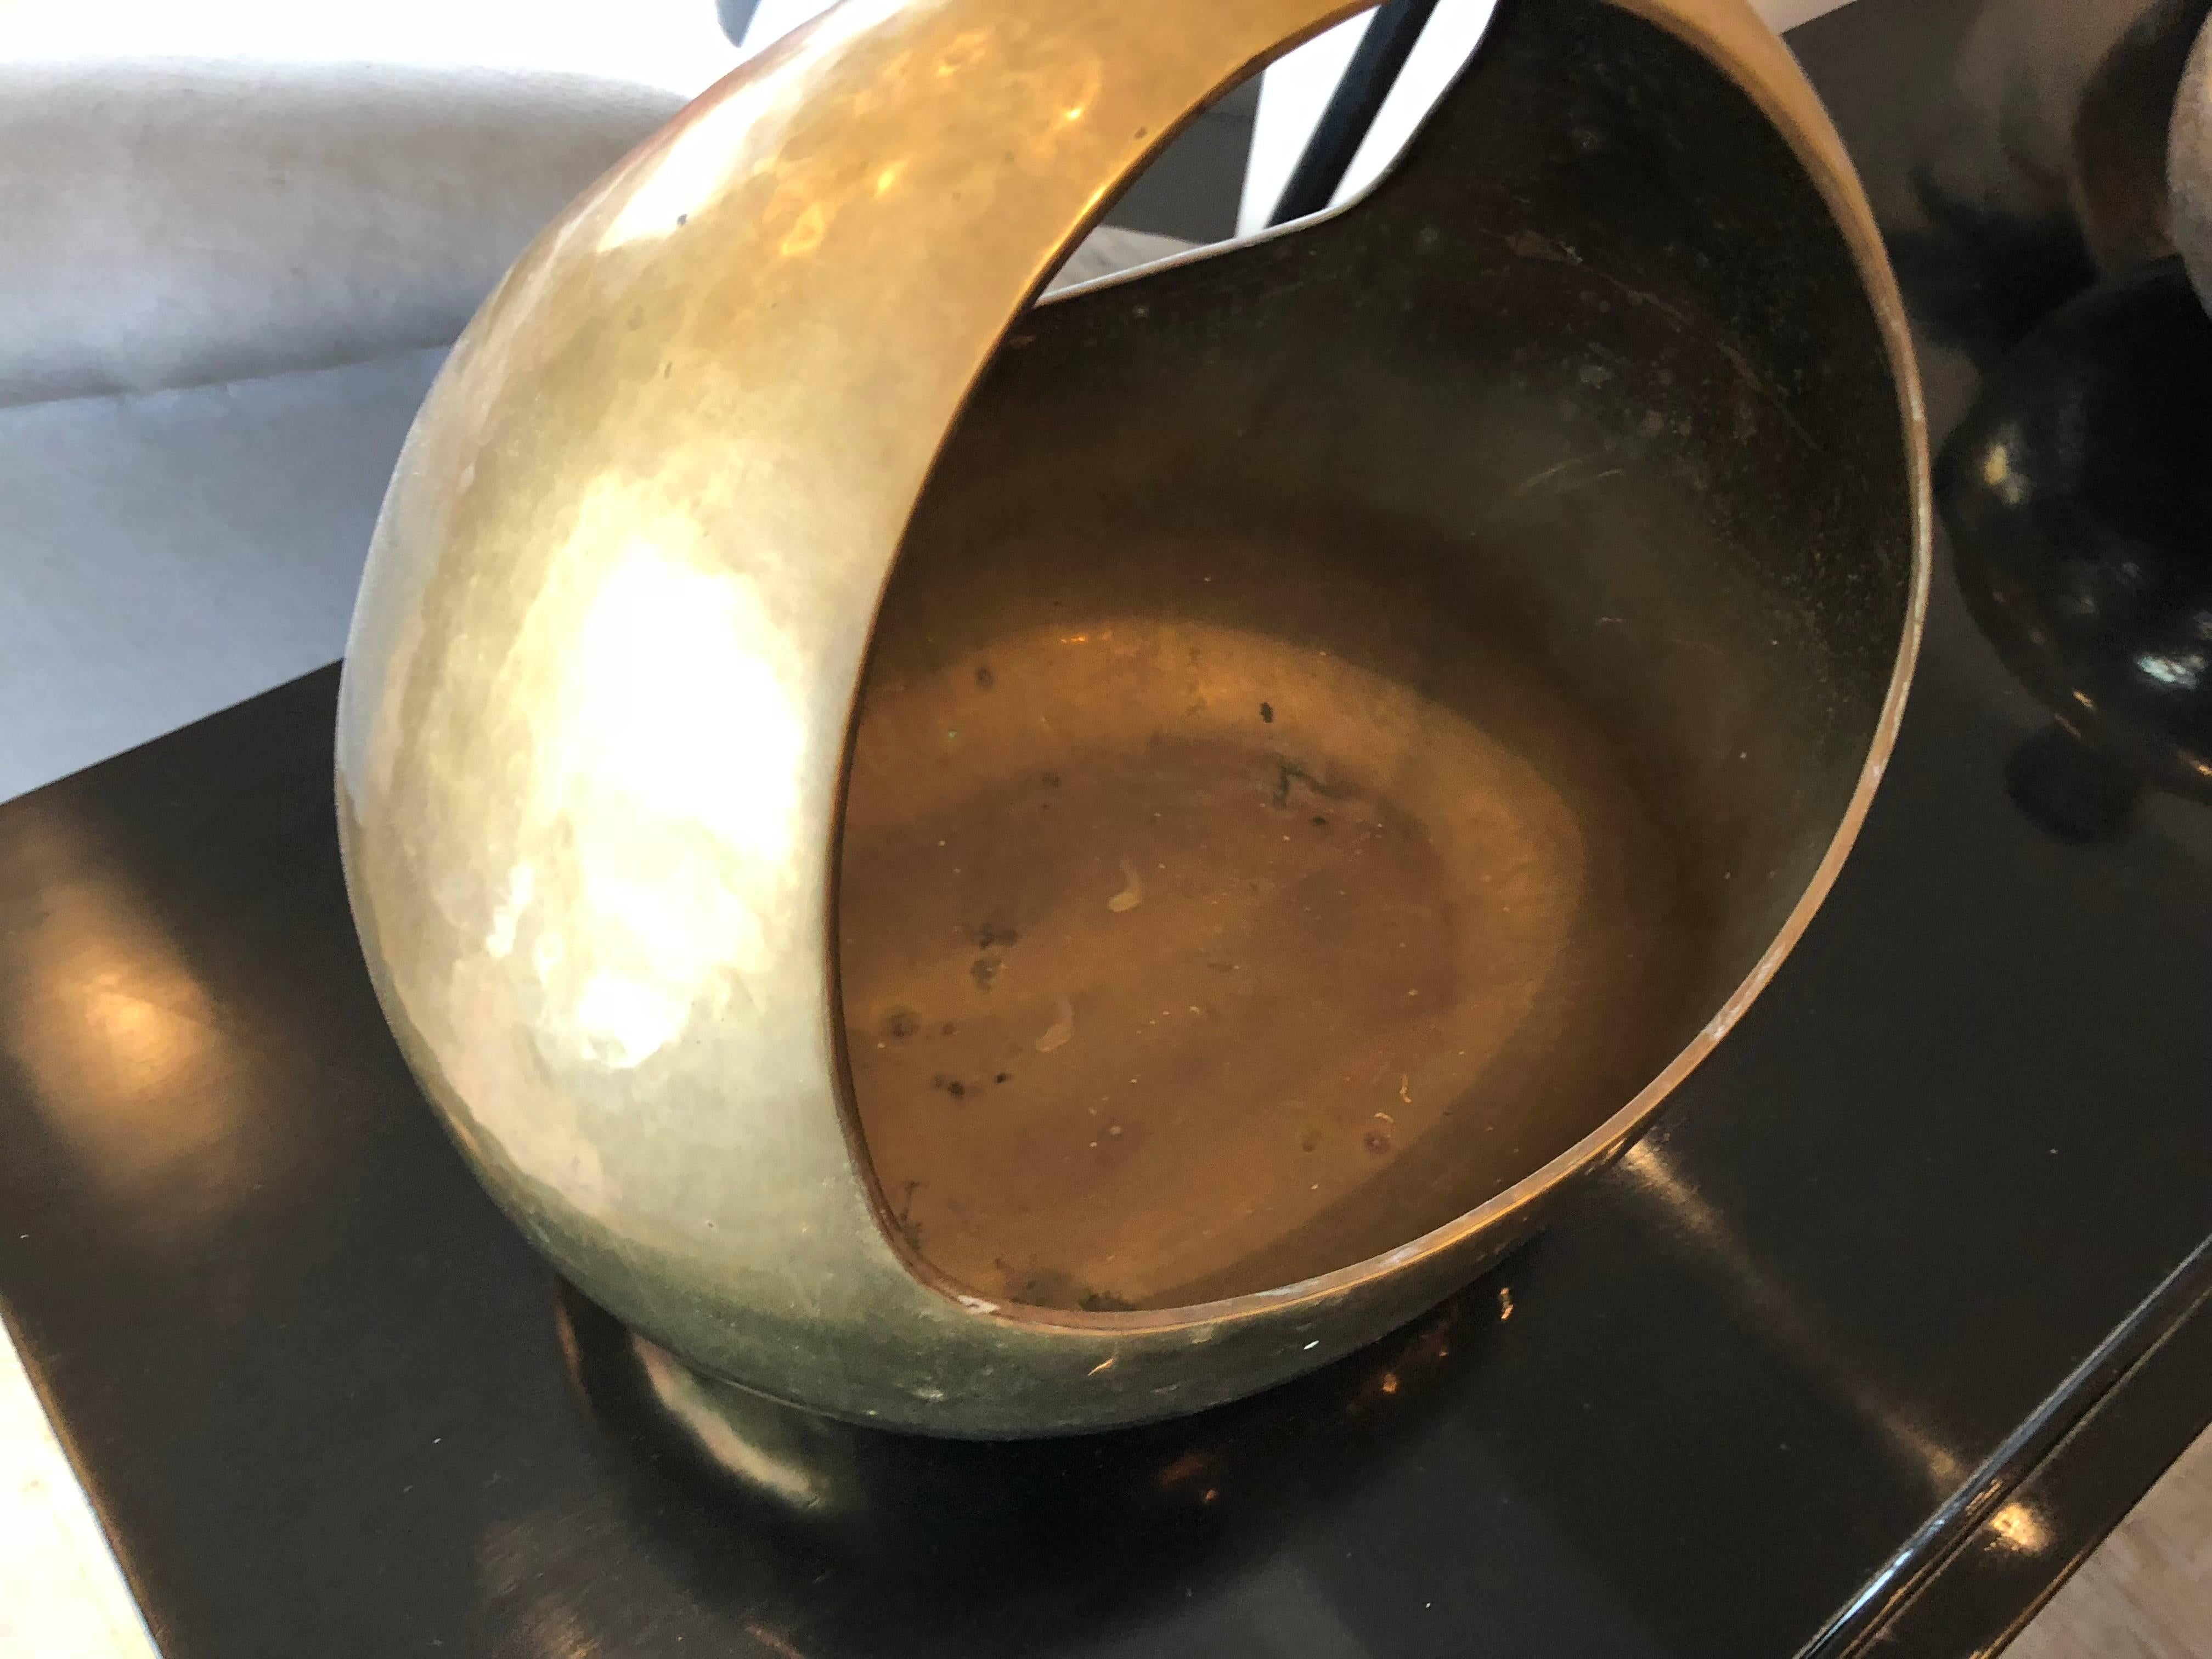 Hammered and hand finished brass handled vessel from the 1960s by Job Art. Made in Italy.